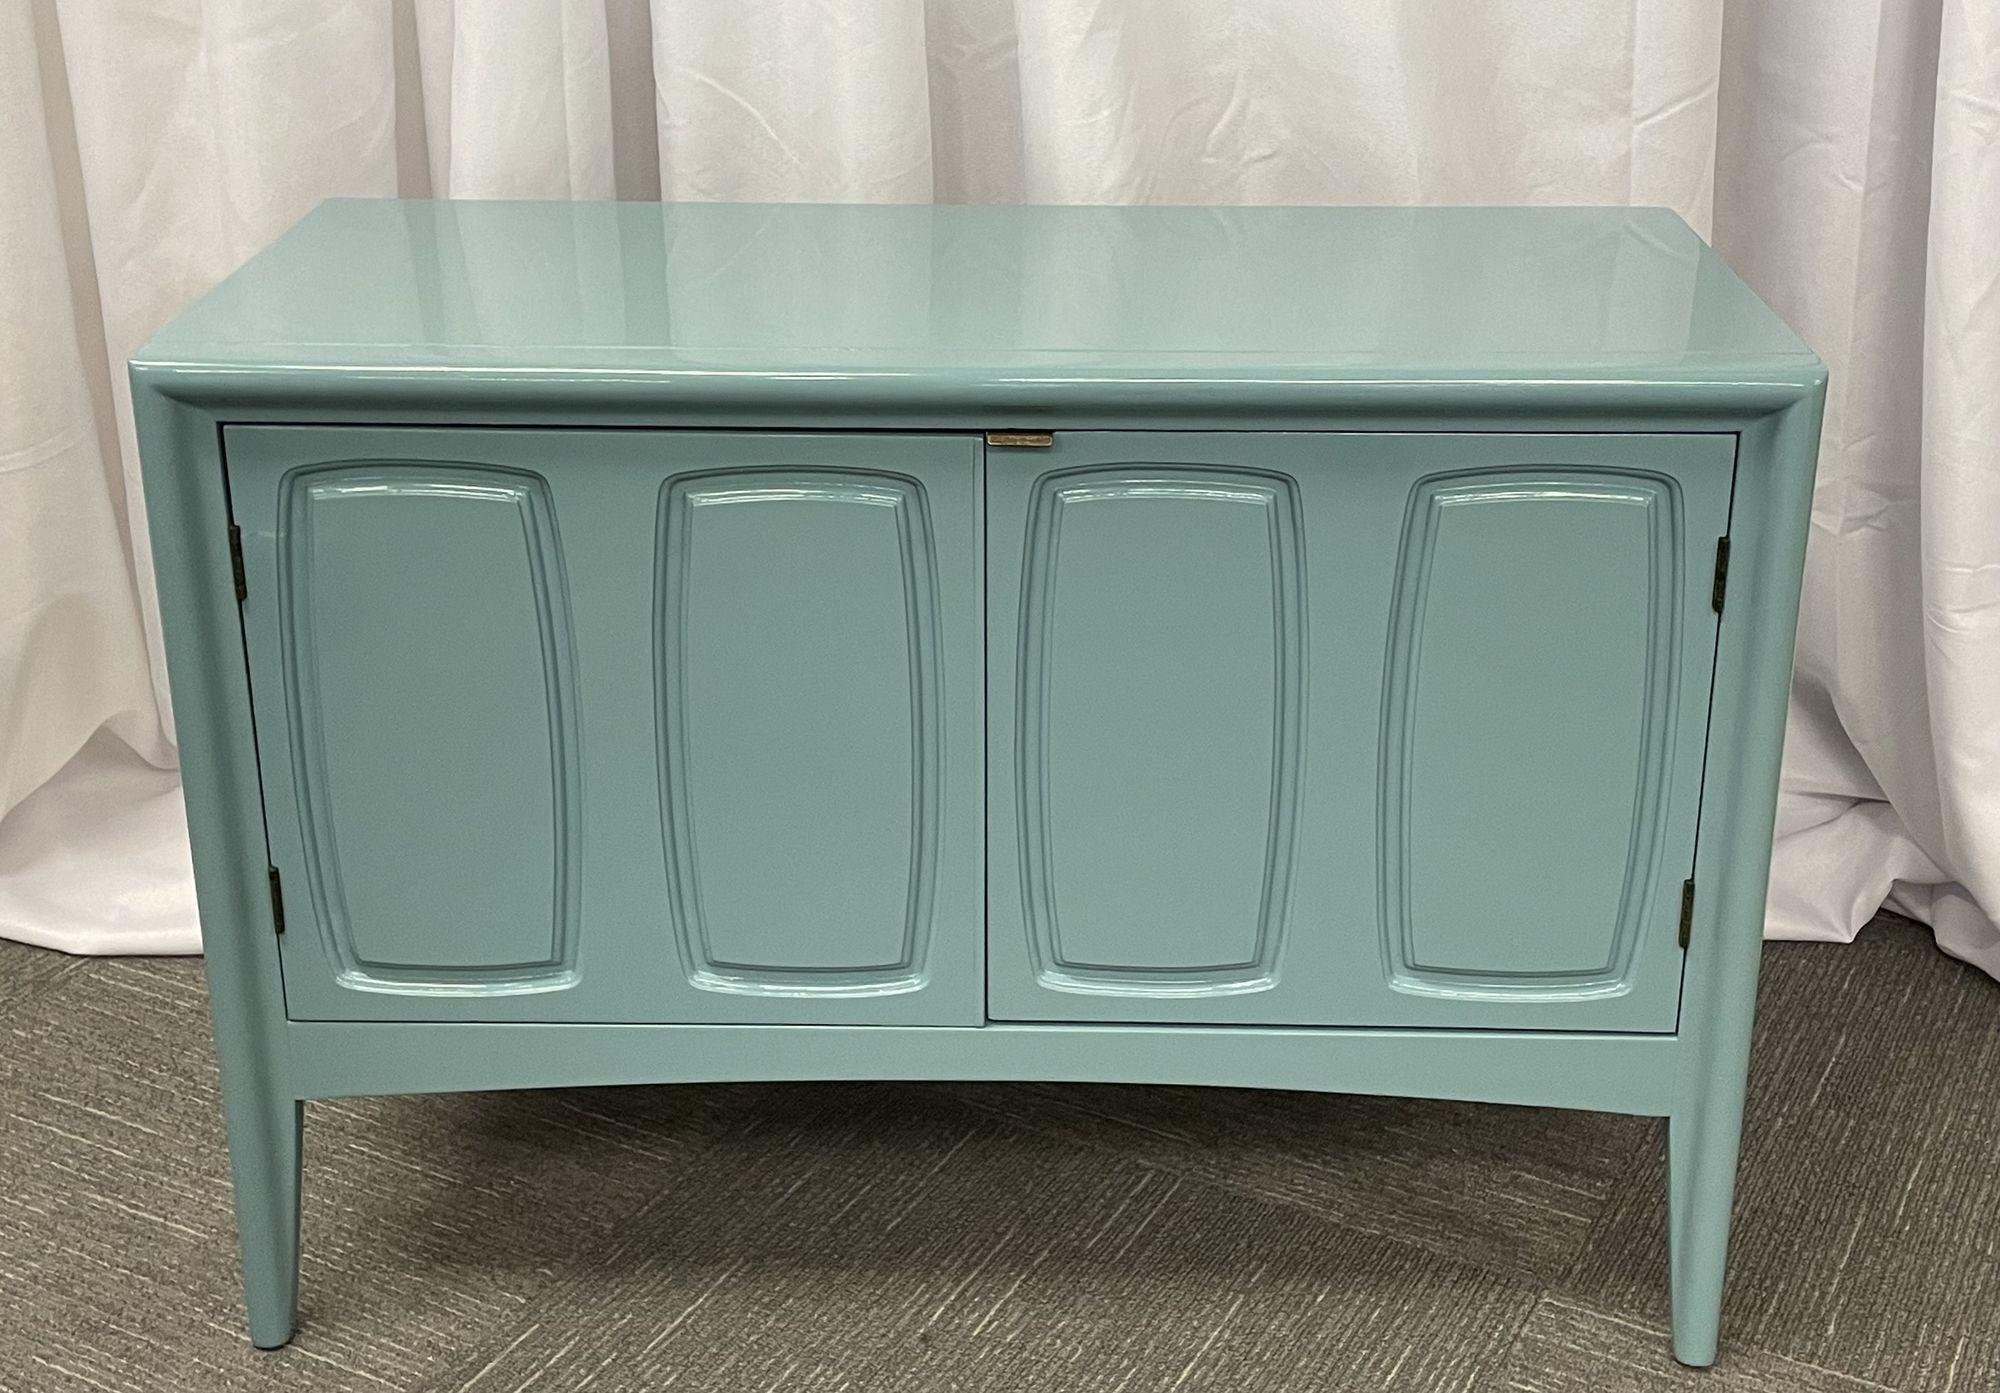 A Mid Century Modern Chest, Nightstand or Table, Robins Egg Blue
 
A Mid Century Modern Robin Egg Blue painted, lacquered commode, chest or night table. Having a single interior drawer with the fitted interior having been fully refinished as well as